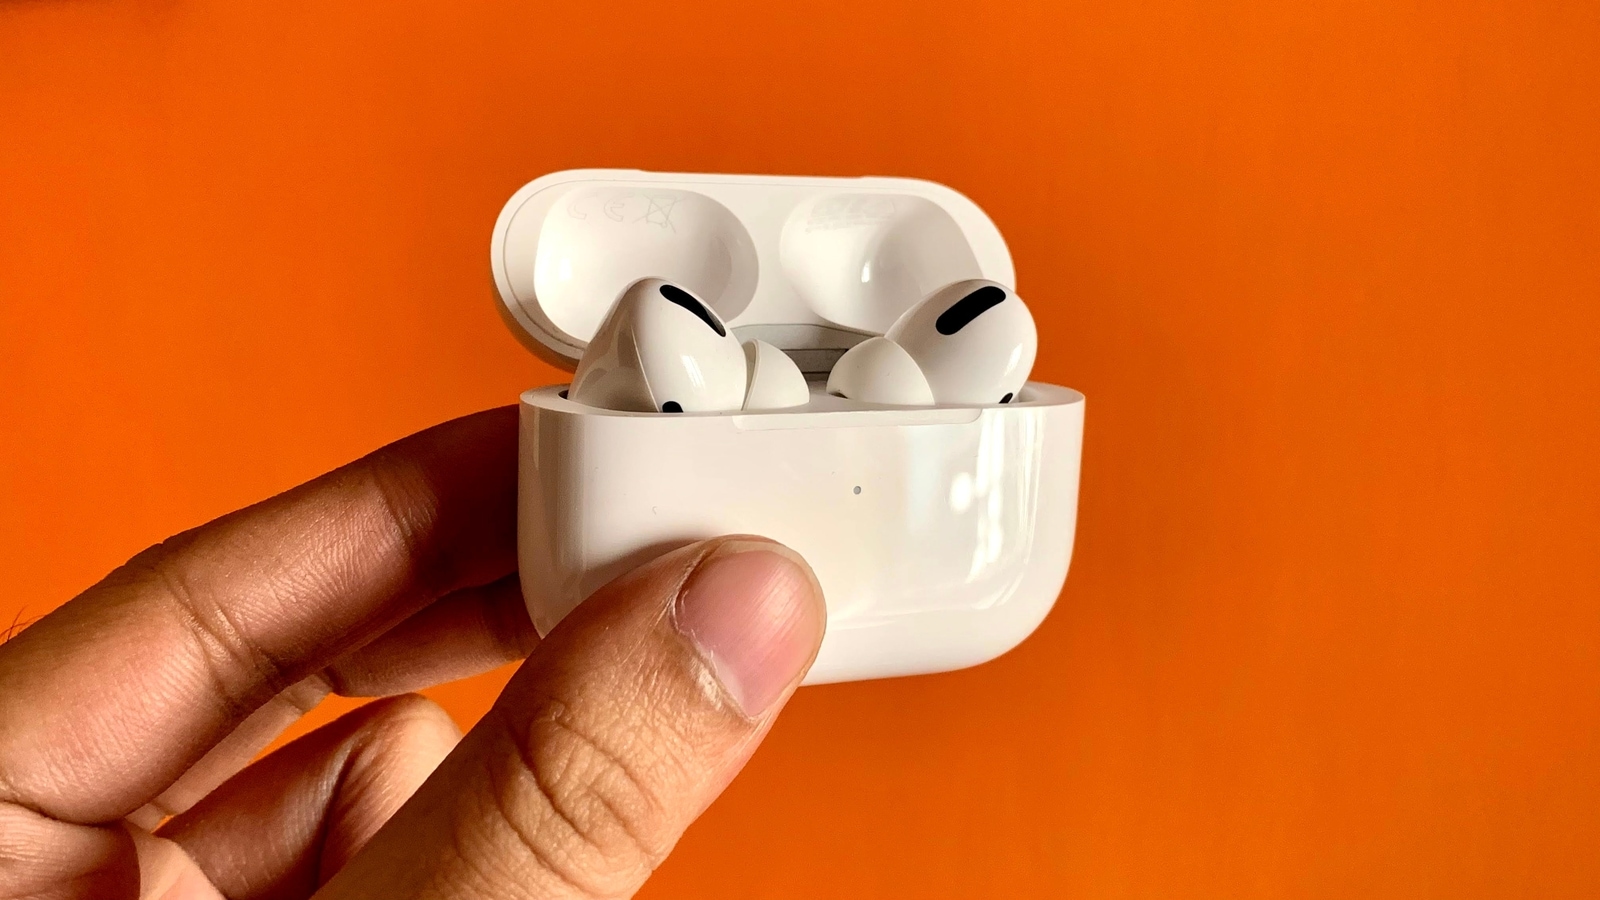 New Apple AirPods Pro selling for the lowest ever price at Amazon! Get